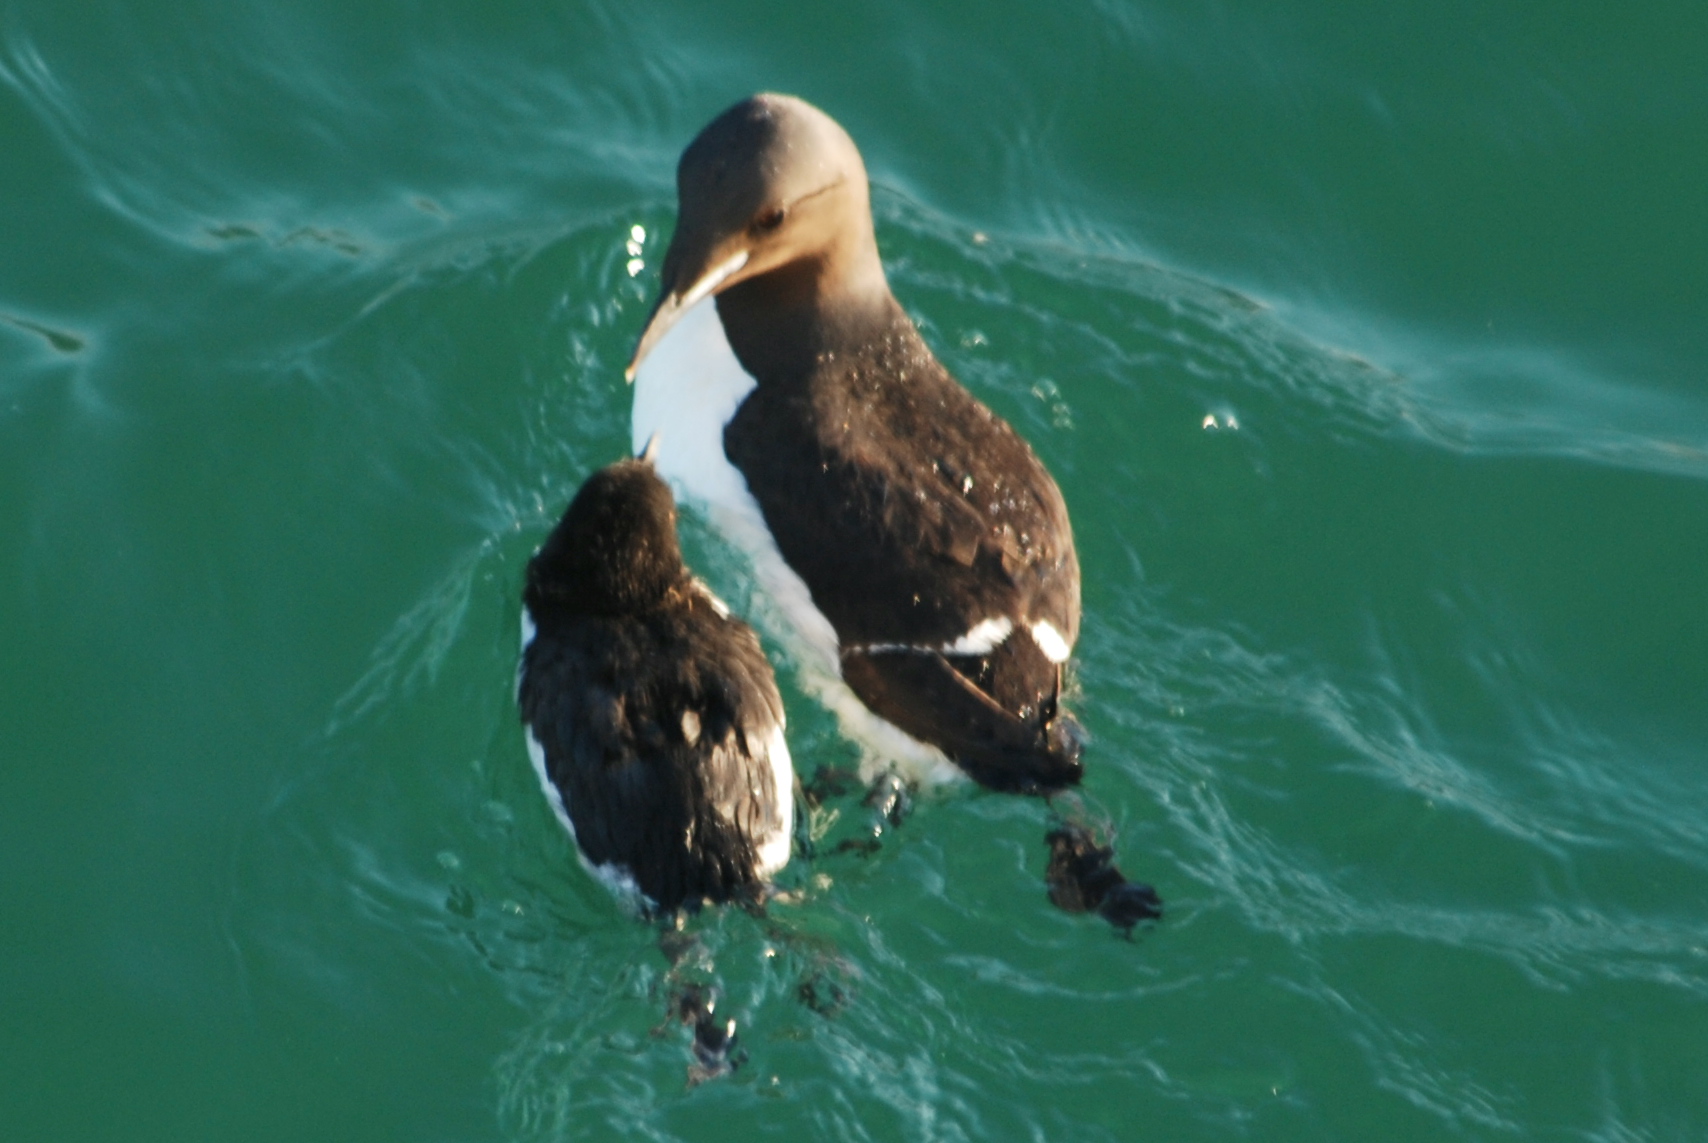 Click picture to see more Brunnich's Guillemots (Thick-billed Murres).